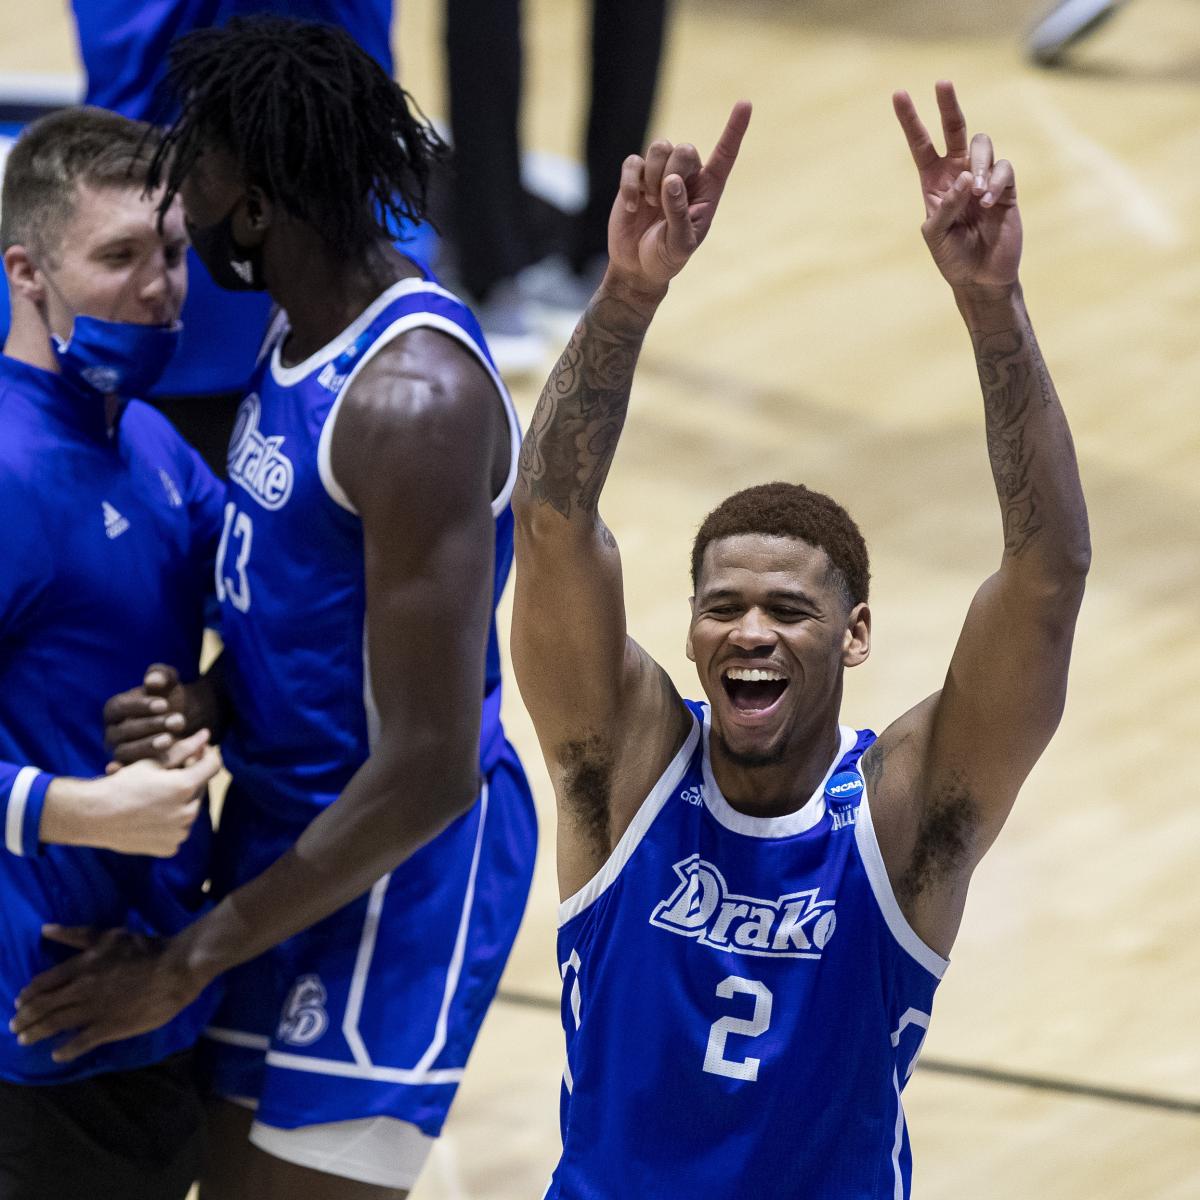 NCAA Tournament 2021: Winners and Losers of First Four